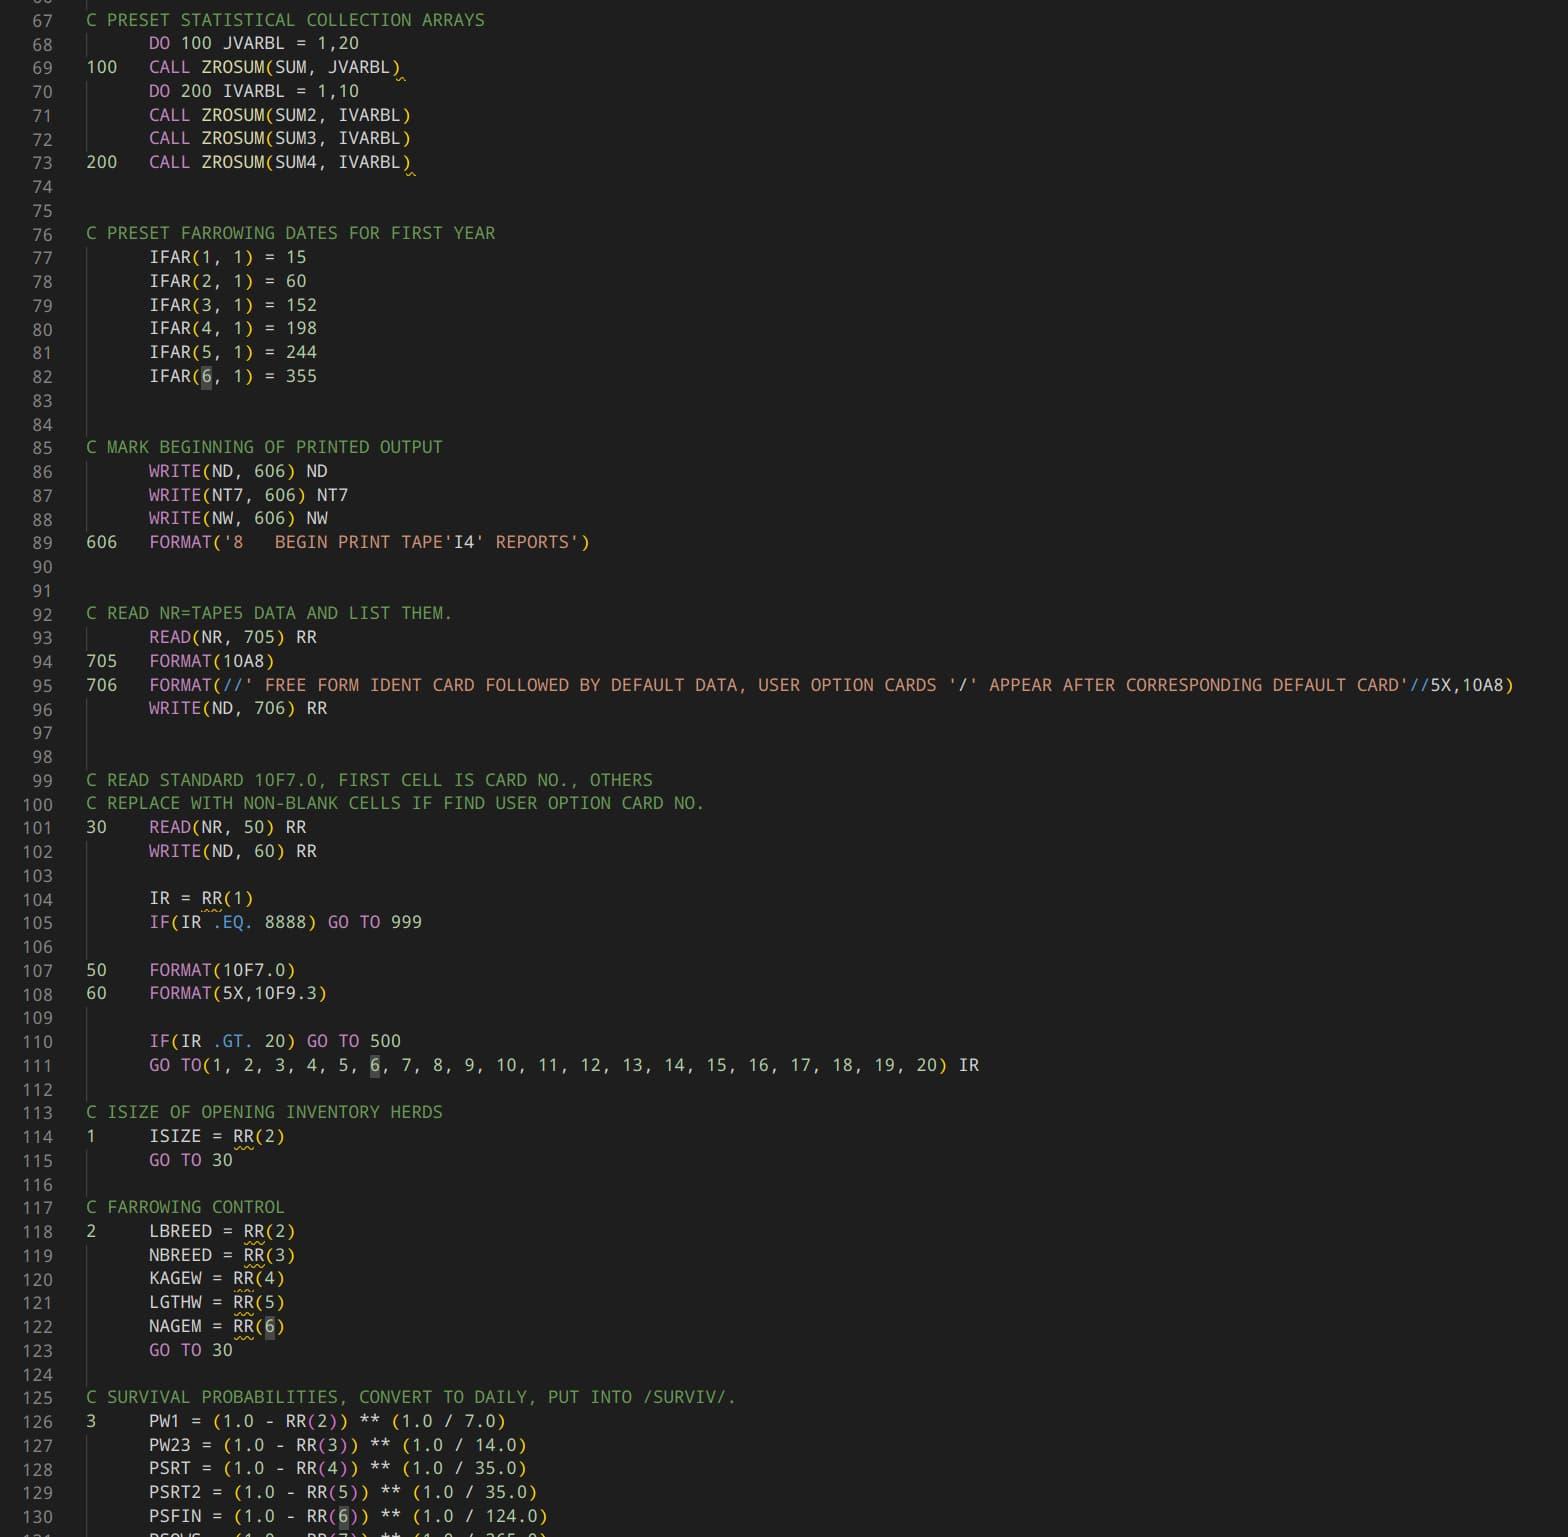 A screenshot from the modern code editor VS Code, showing several lines of FORTRAN